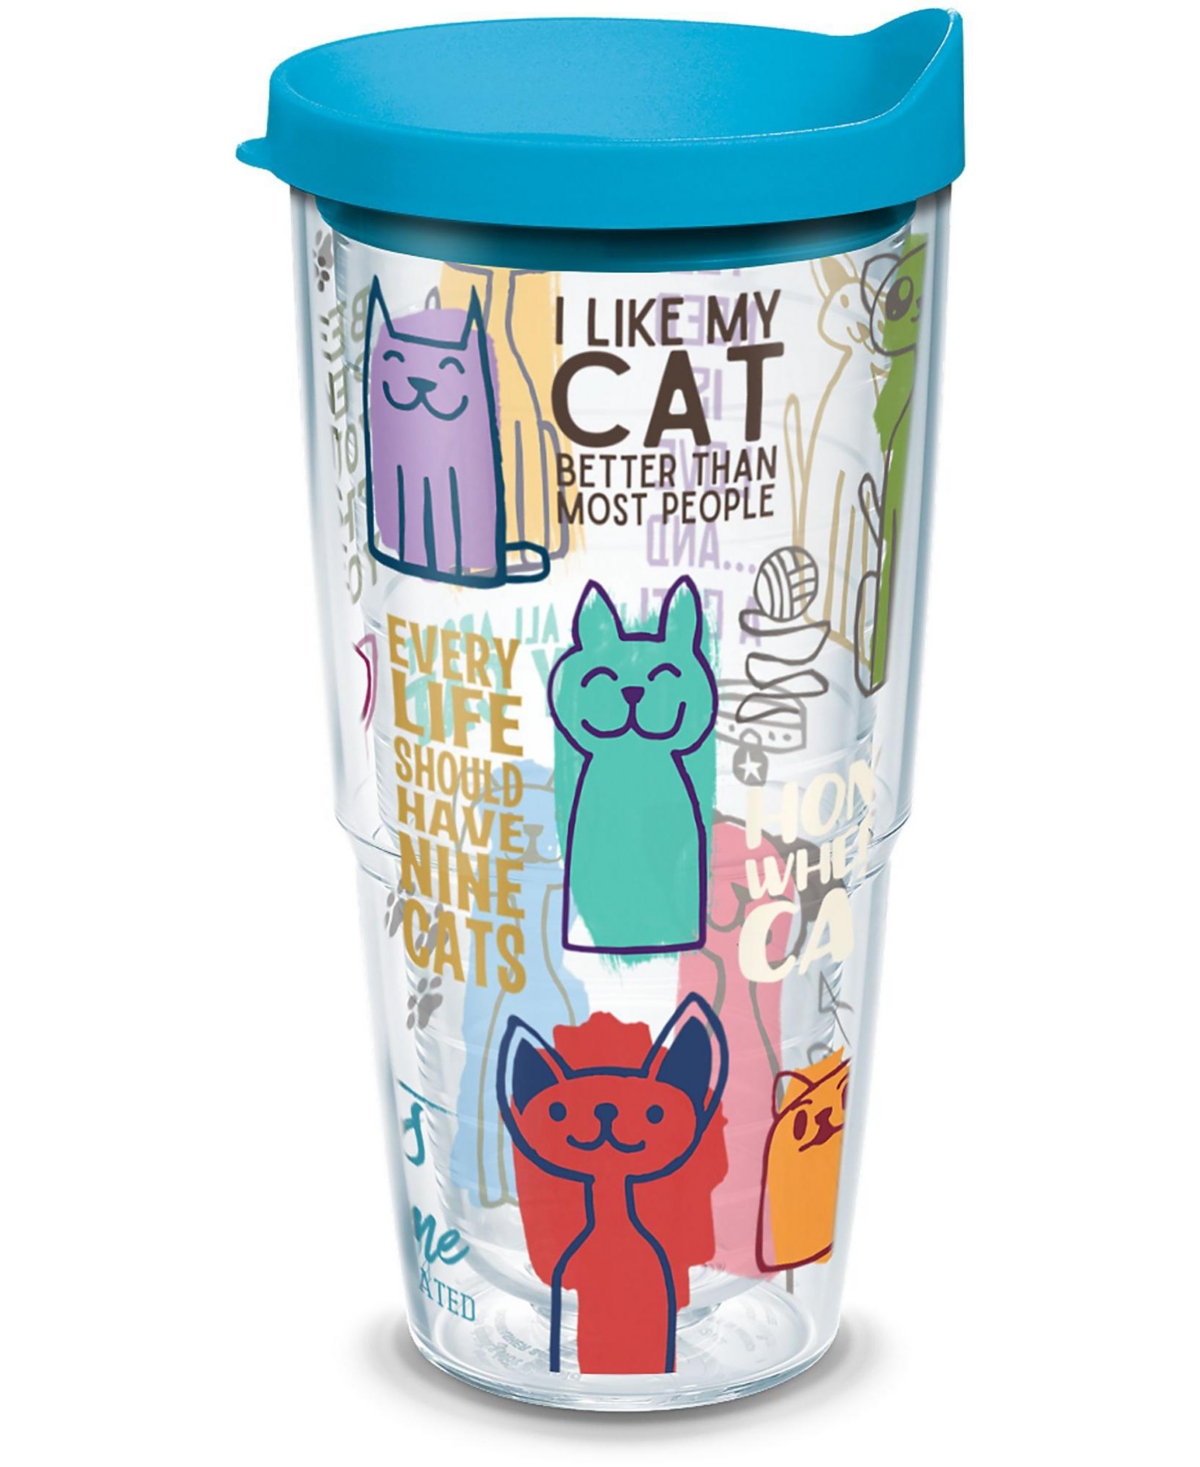 Tervis Tumbler Tervis Cat Sayings Made In Usa Double Walled Insulated Tumbler Travel Cup Keeps Drinks Cold & Hot, 2 In Open Miscellaneous